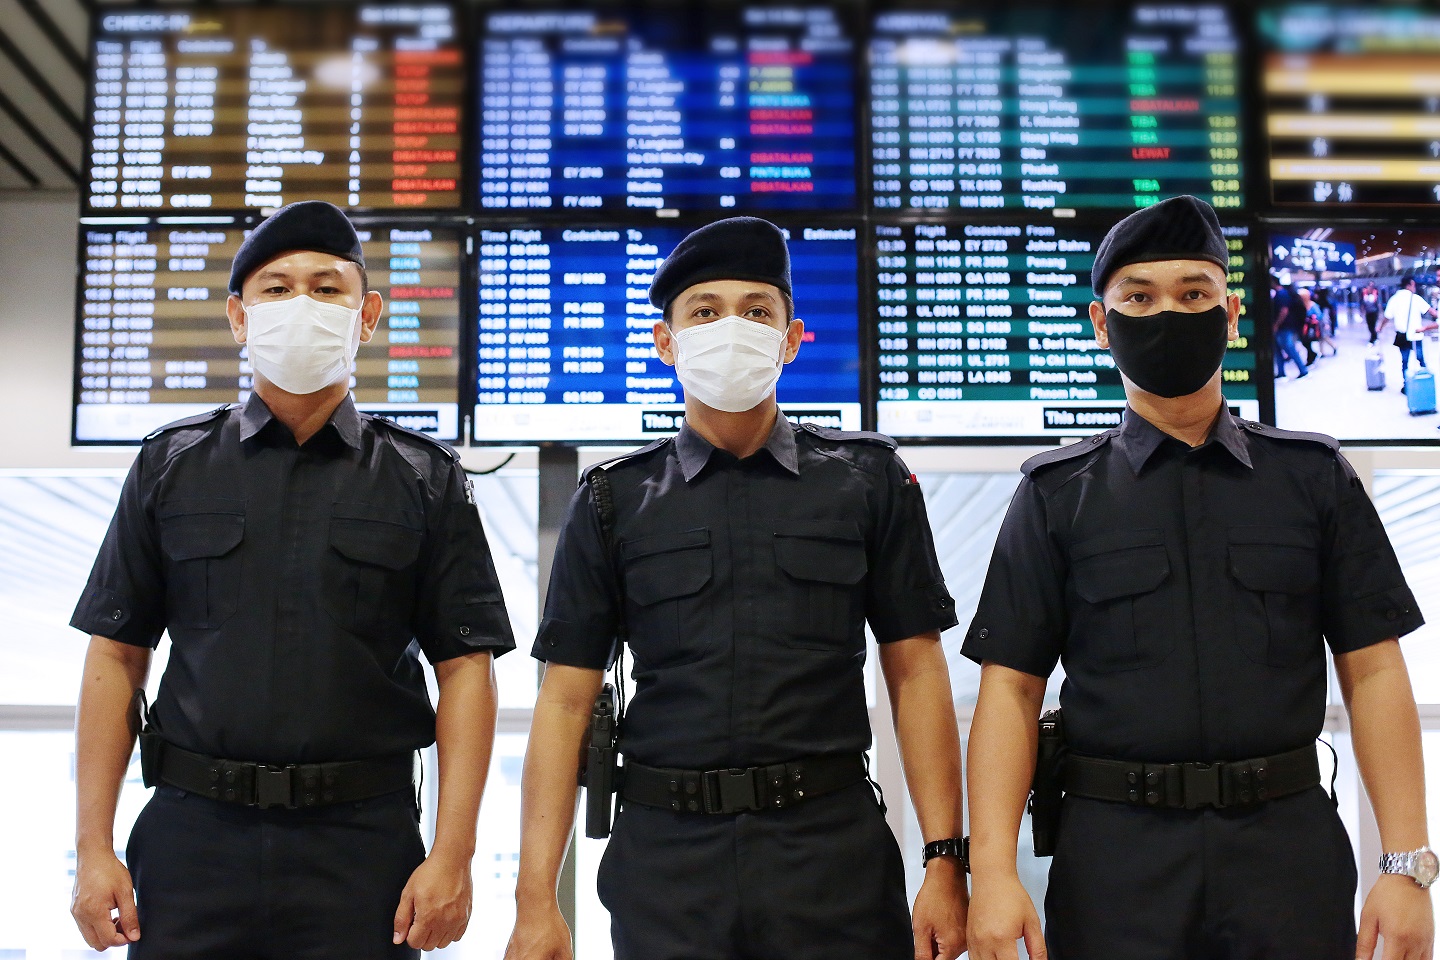 Malaysian Police at the Airport - in COVID-19 Masks